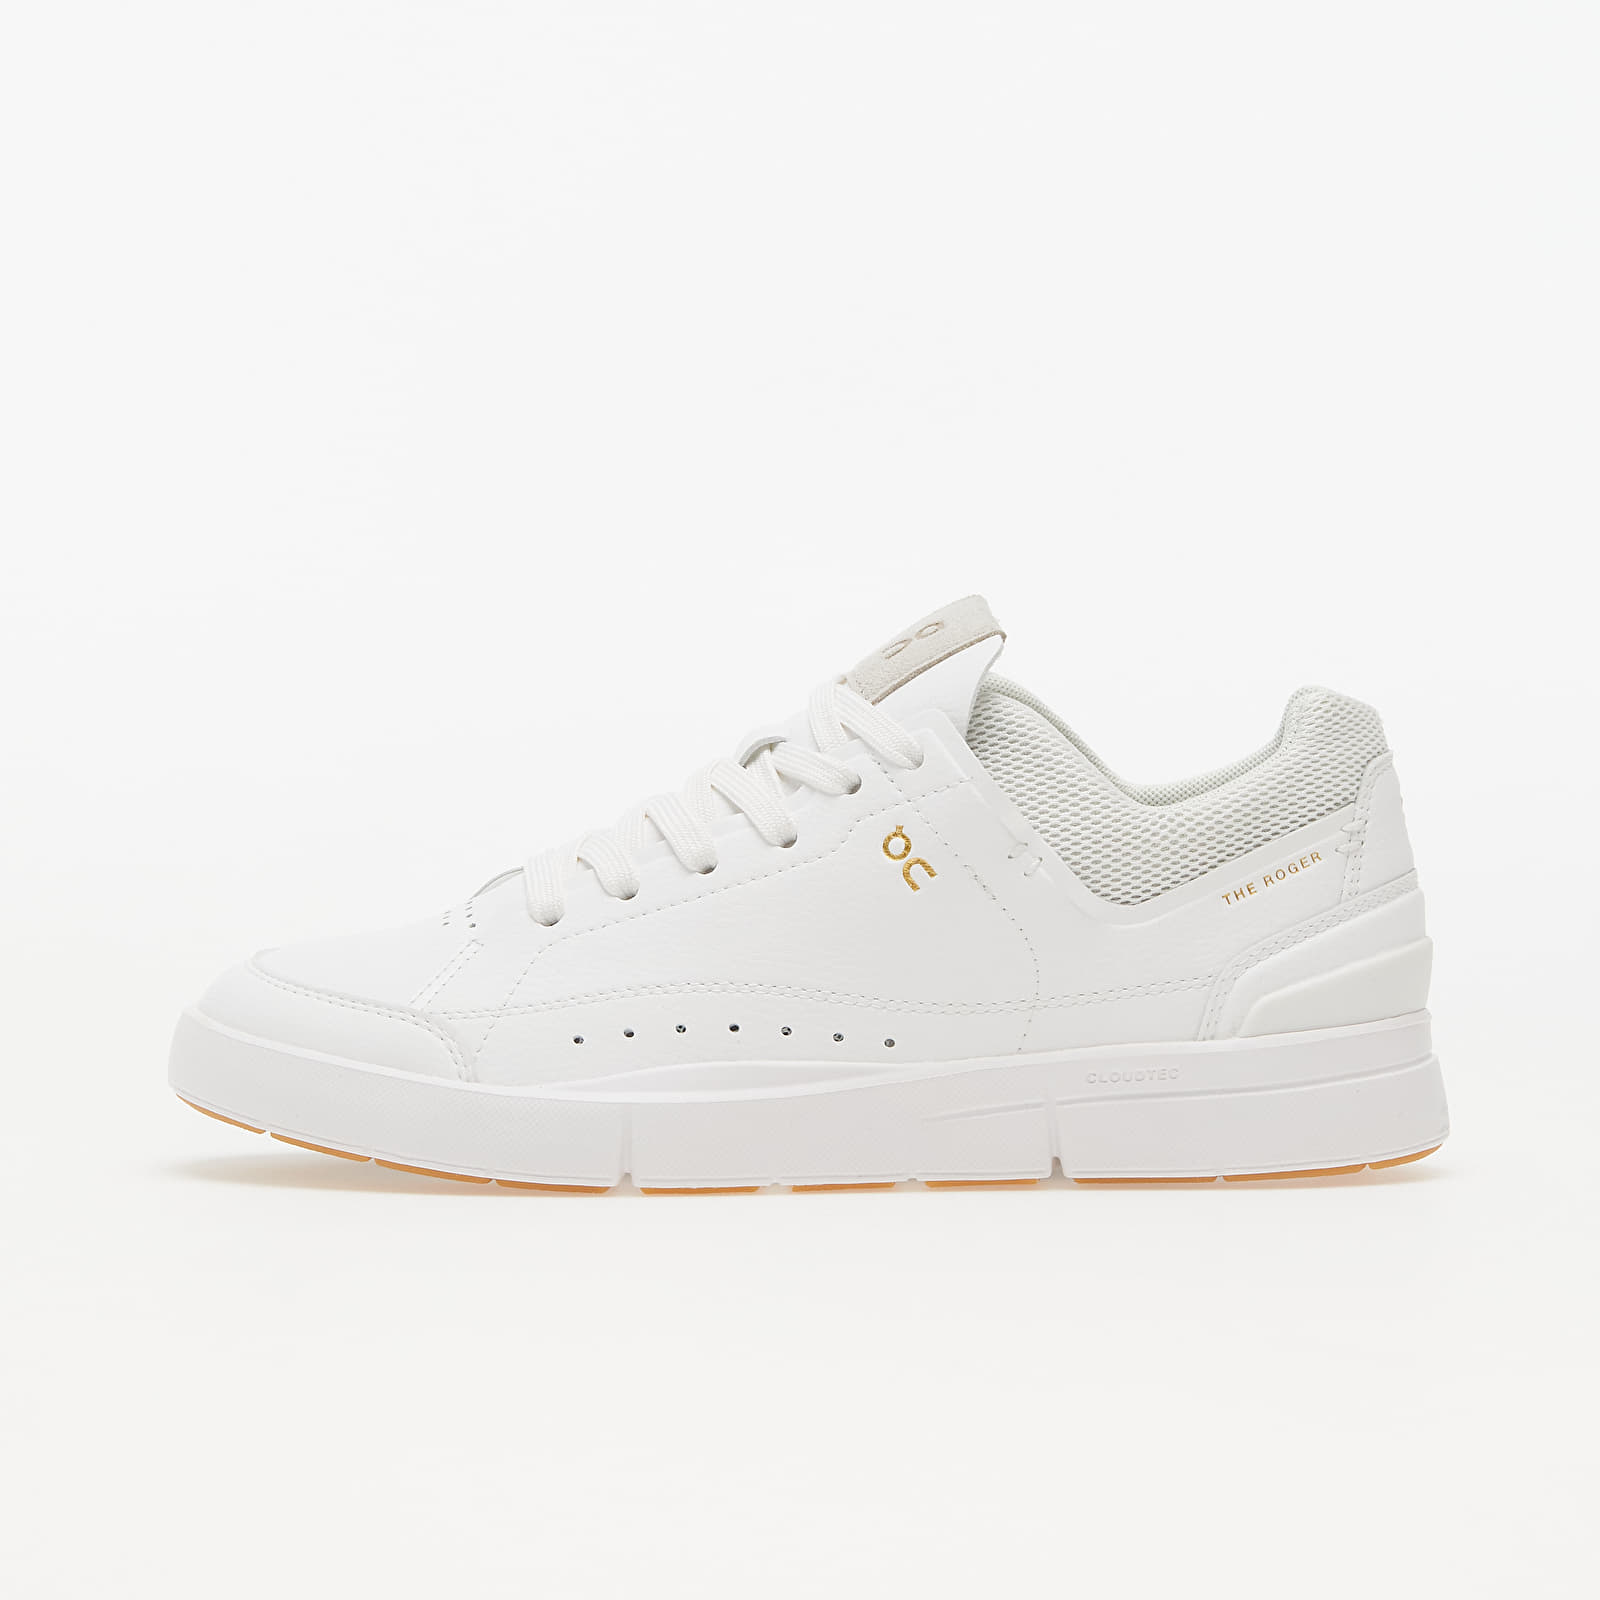 Women's shoes On W The Roger Centre Court White/ Gum